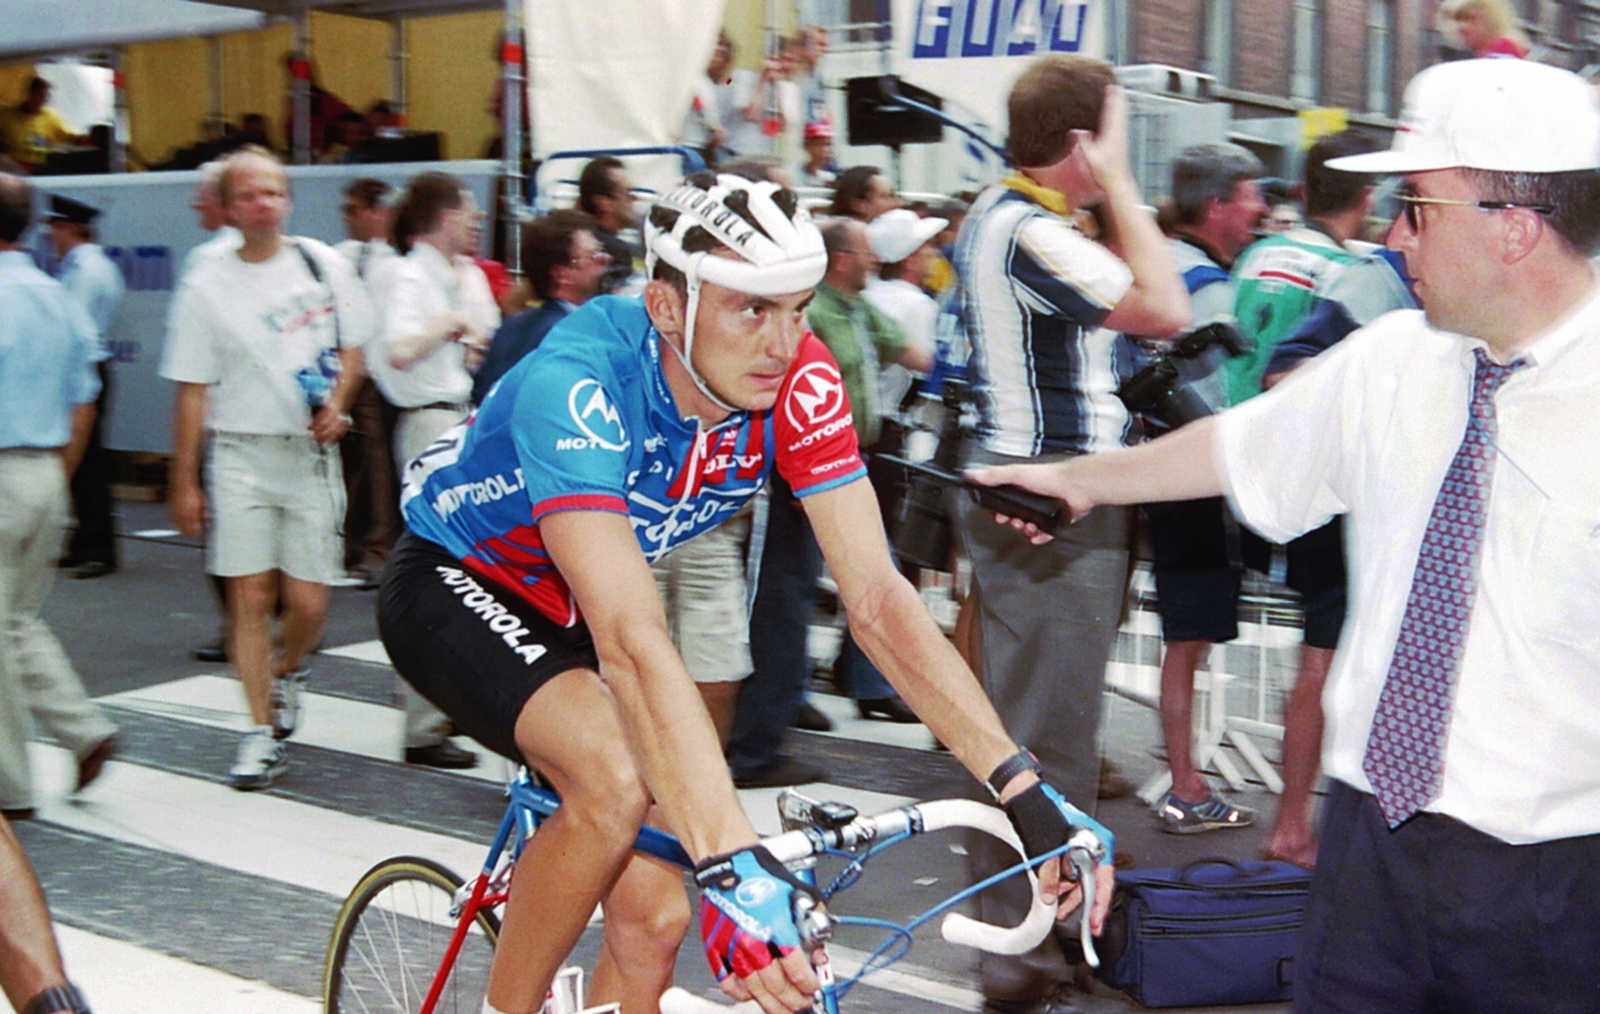 27 years ago today, Fabio Casartelli died during the Tour de France